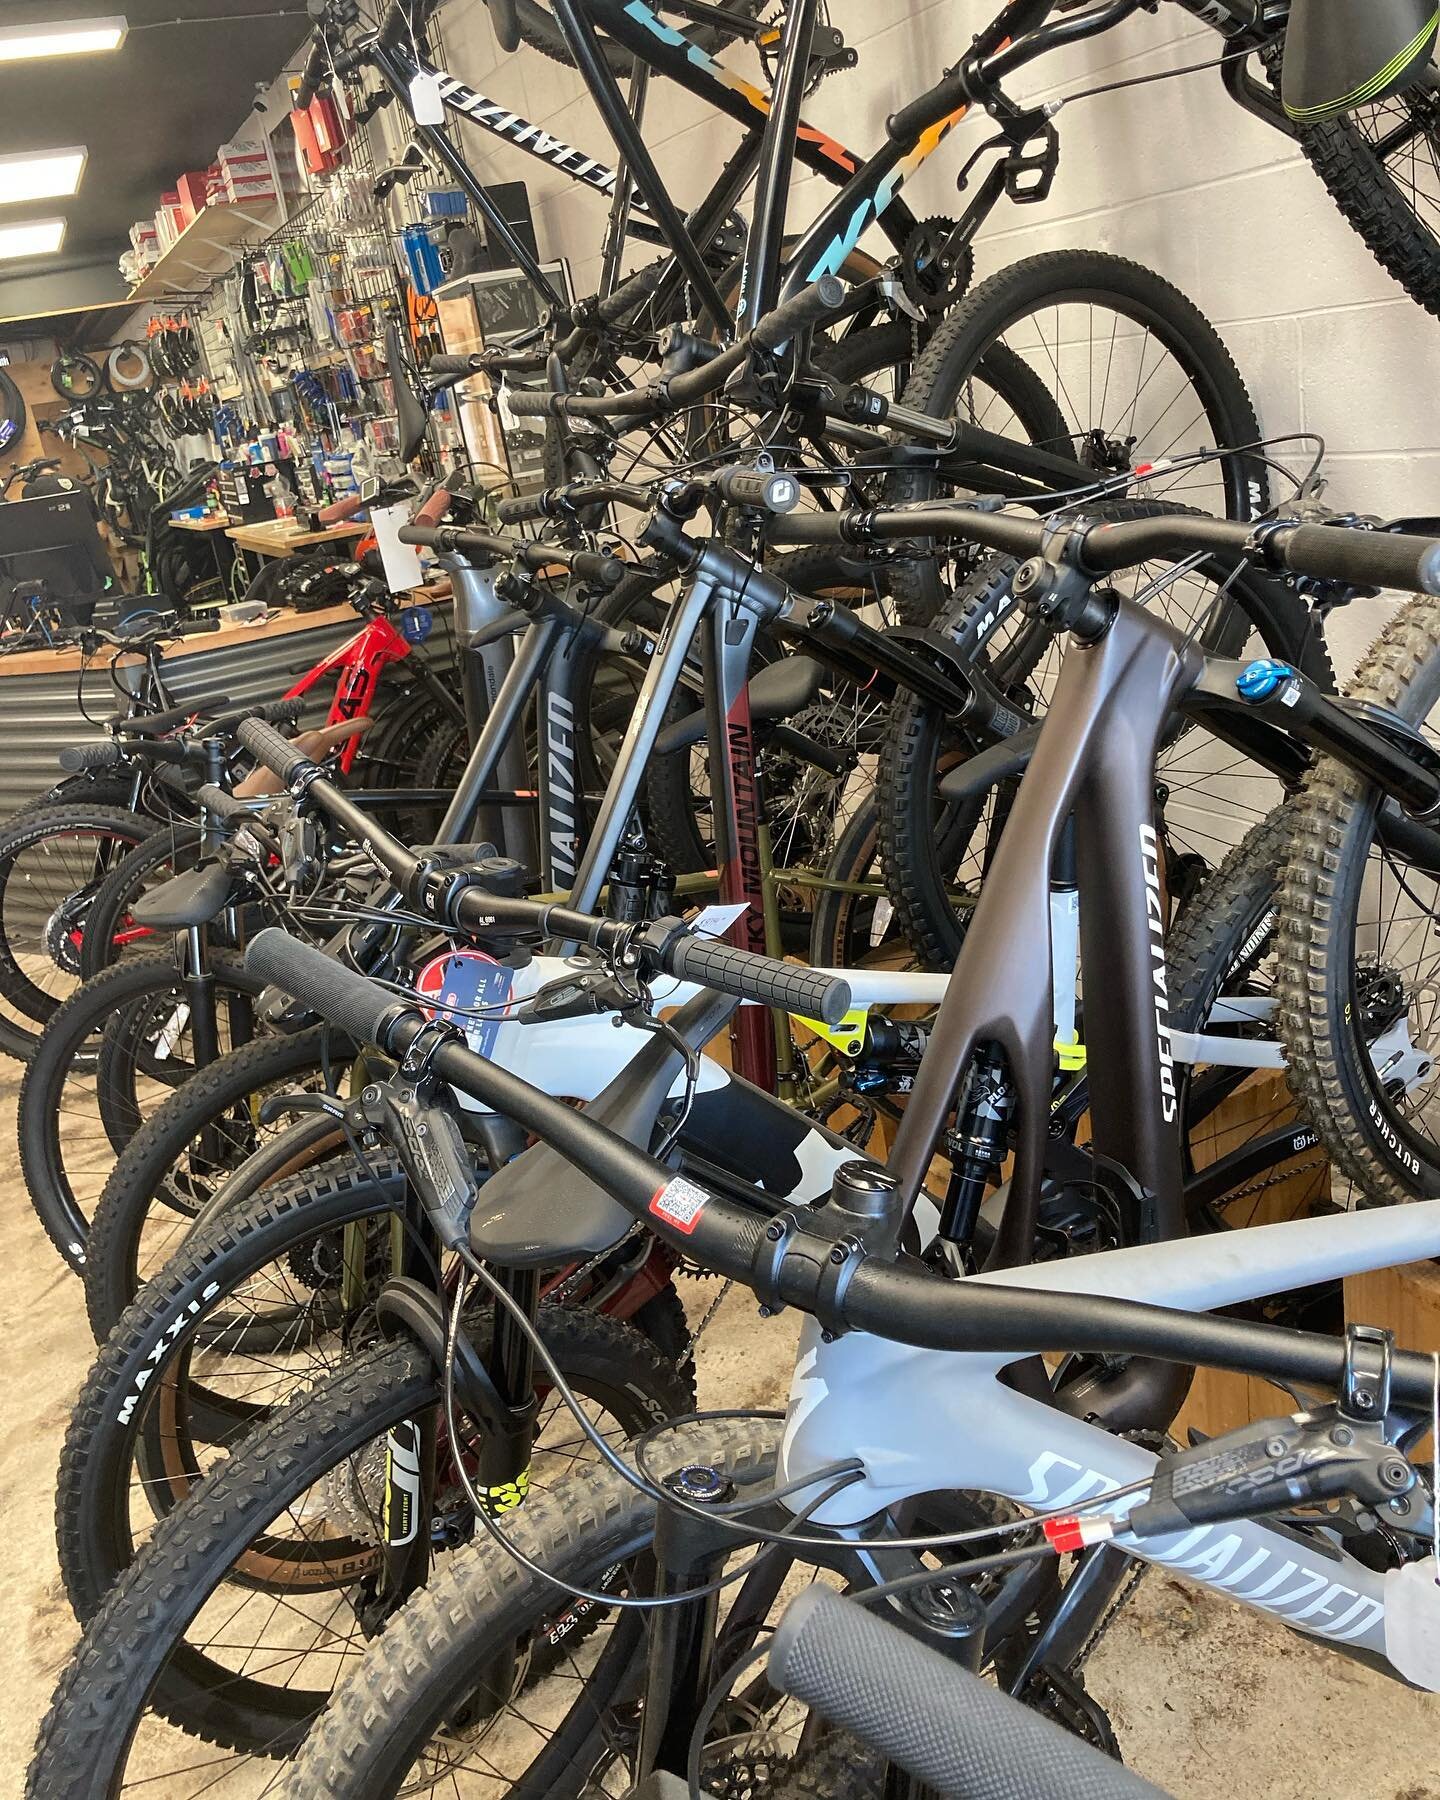 End of Summer Sale! All in stock 2022/2023 bikes 10-15% off*! Between both locations we have a lot of options available with over 100 bikes in stock. All accessories on sale!

*Sale off MSRP and some conditions/exceptions may apply. We will try our b